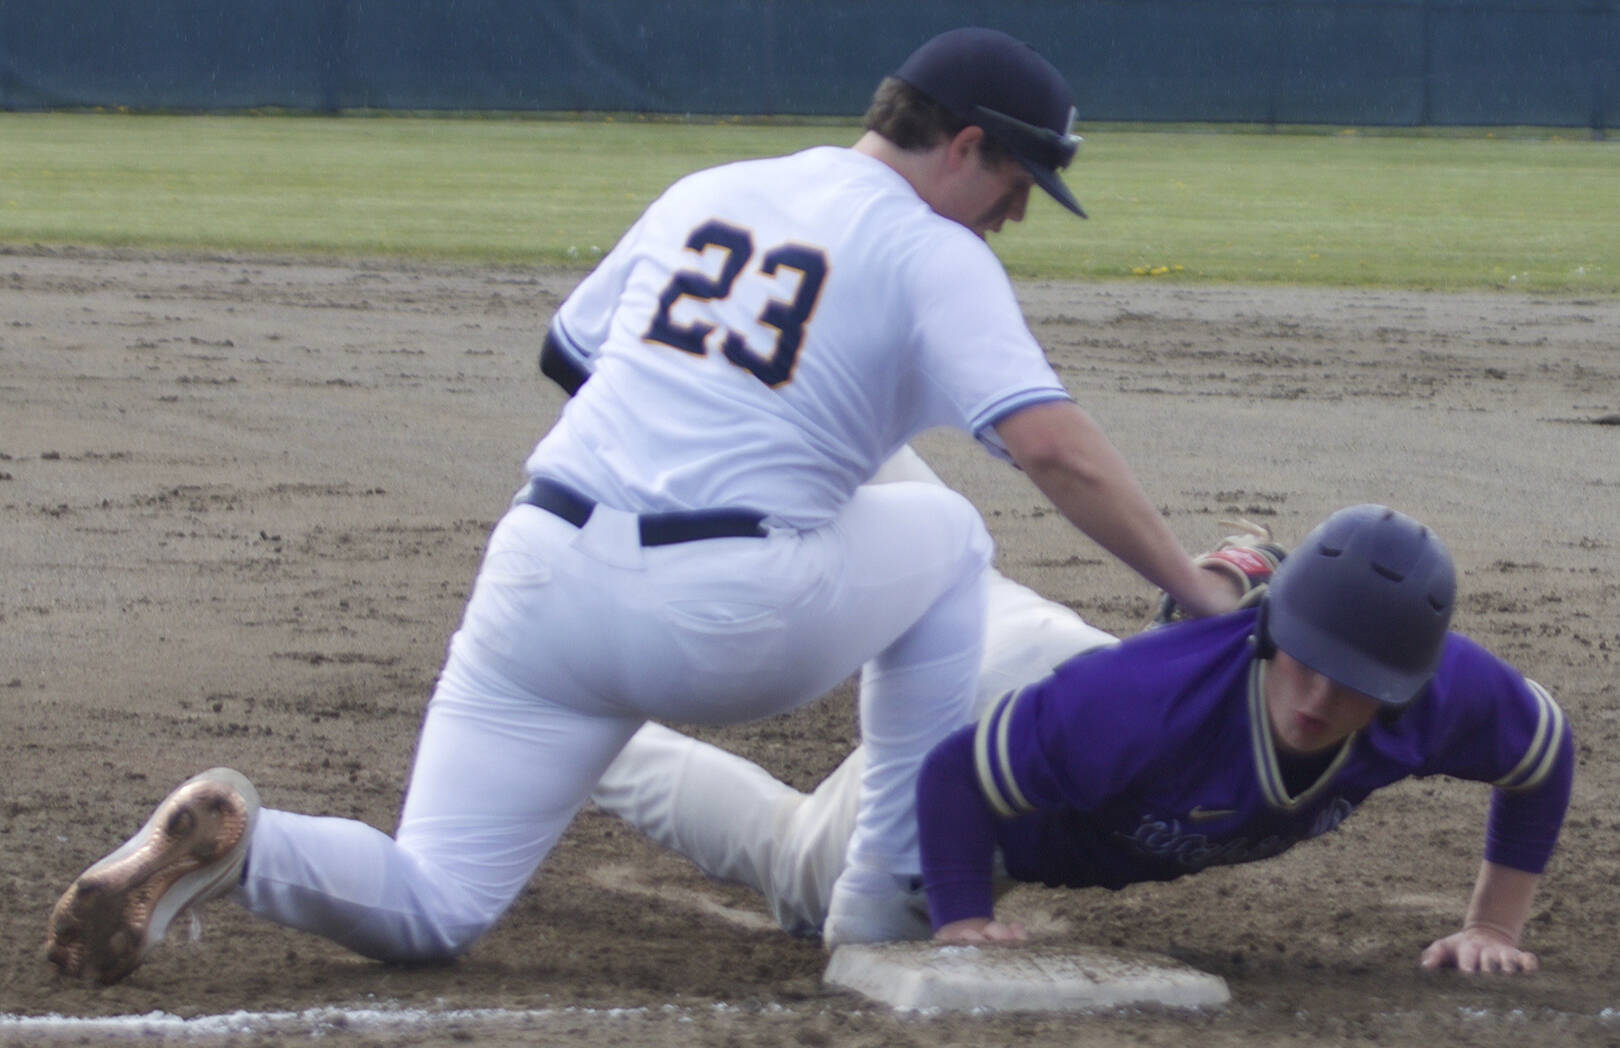 Colton Bower of NK dives safely back to first base after hitting a single in the first inning. Zach Duffy of BHS applies the tag. Steve Powell/North Kitsap Herald